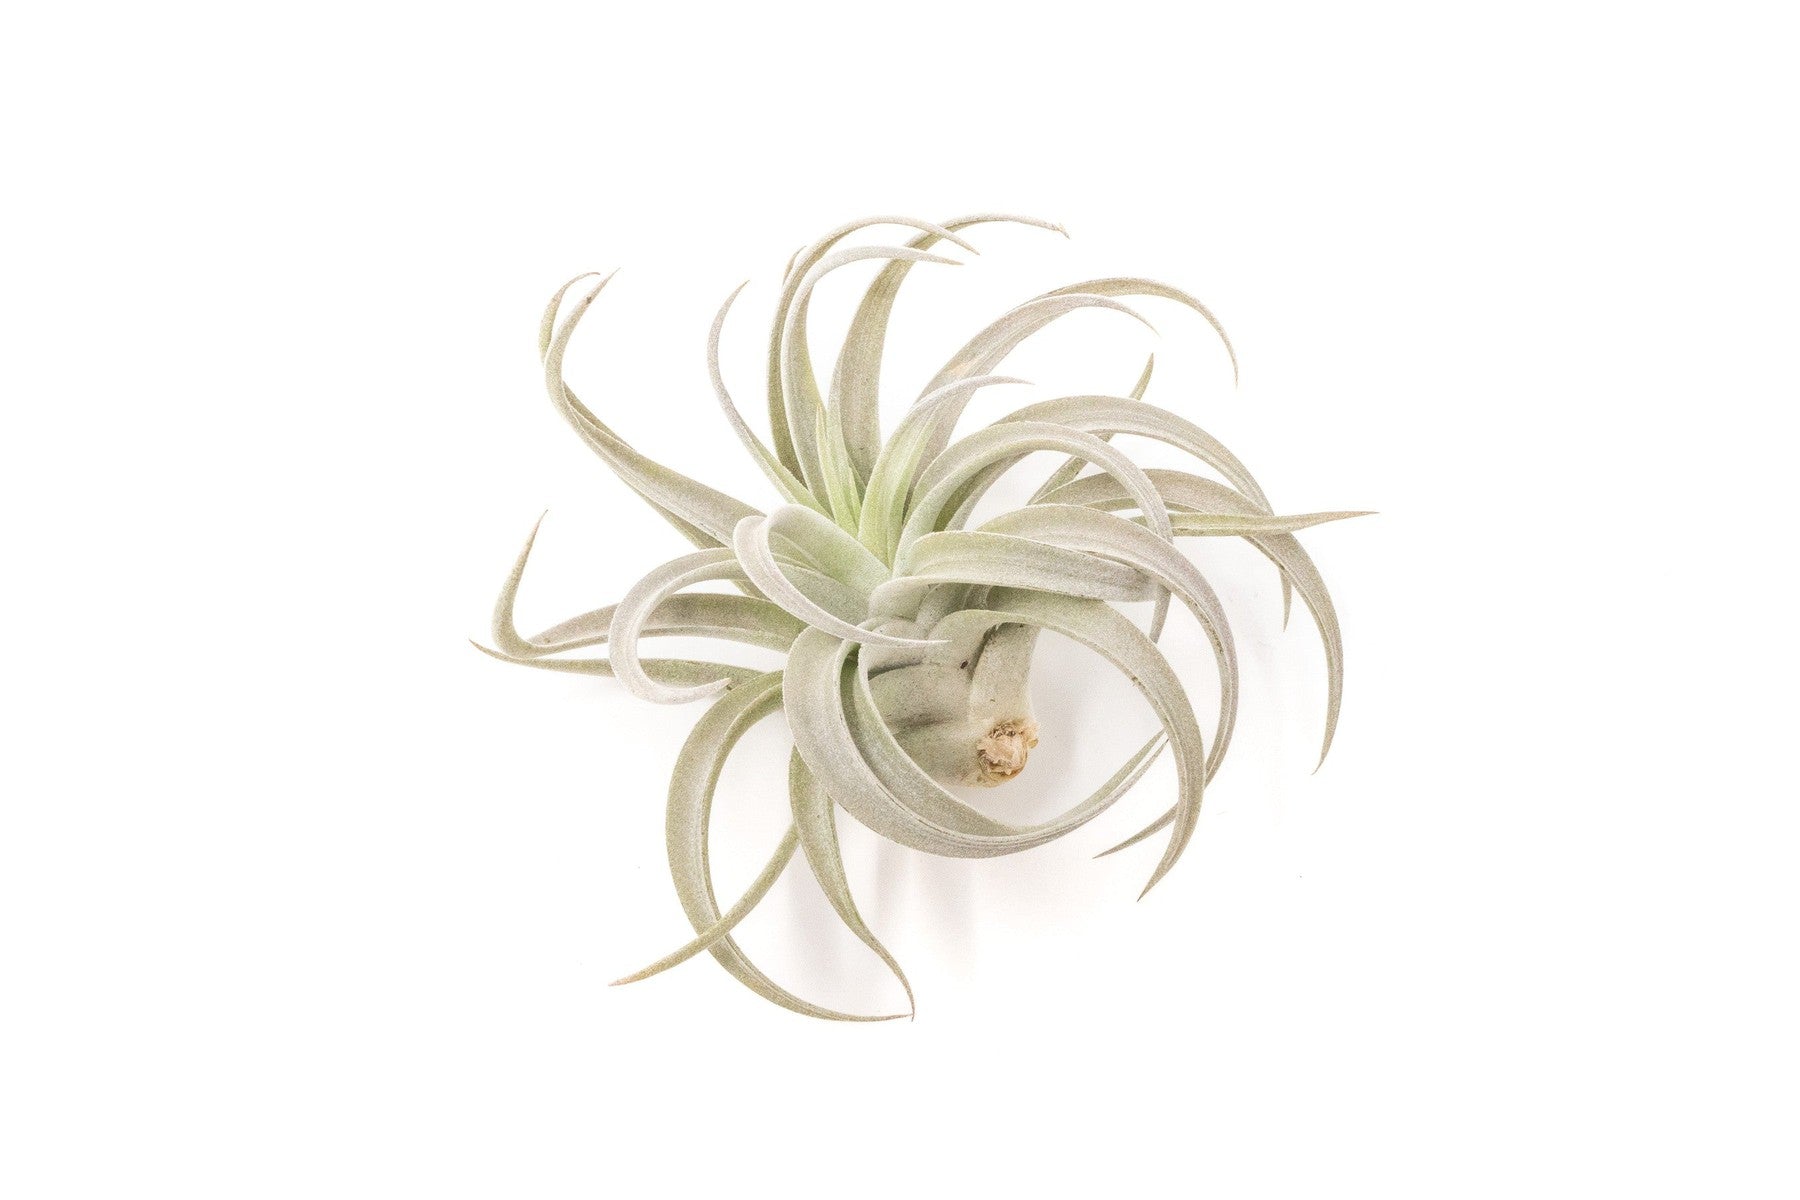 SALE - Tillandsia Harrisii Air Plants - Set of 10, 15, or 20 - 60% Off-airplant-The Succulent Source